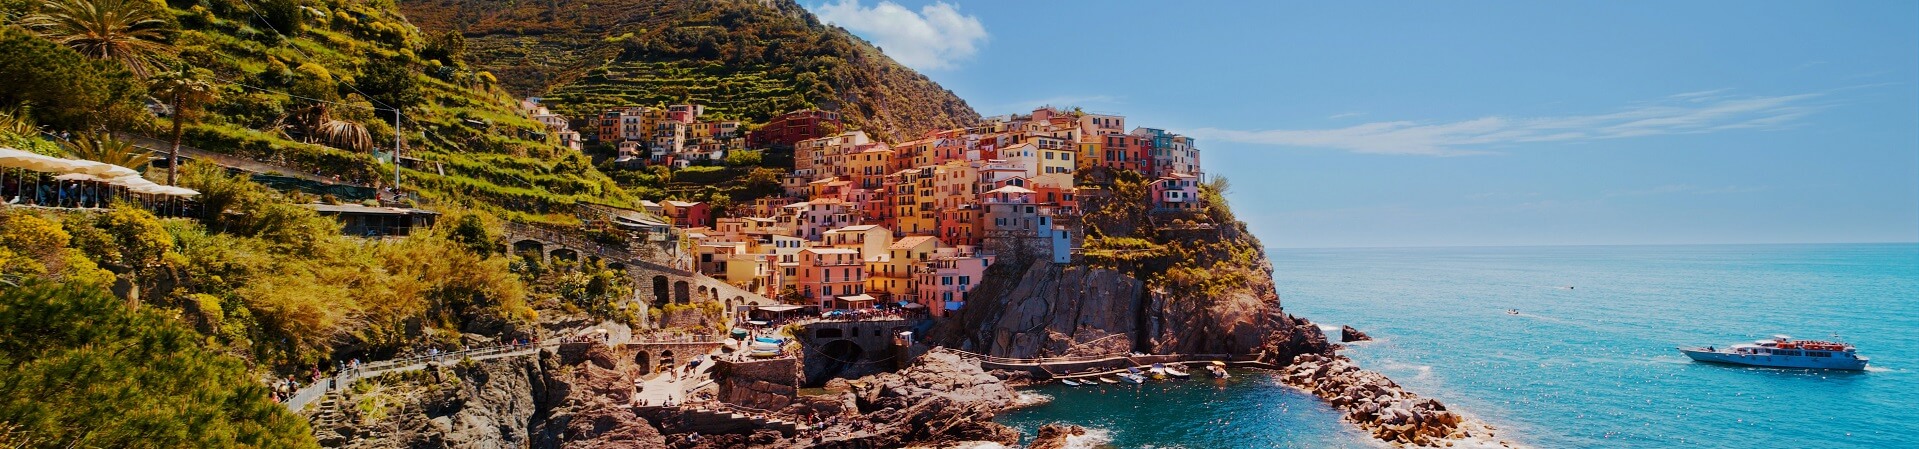 Is a day trip from Florence to Cinque Terre worth it?